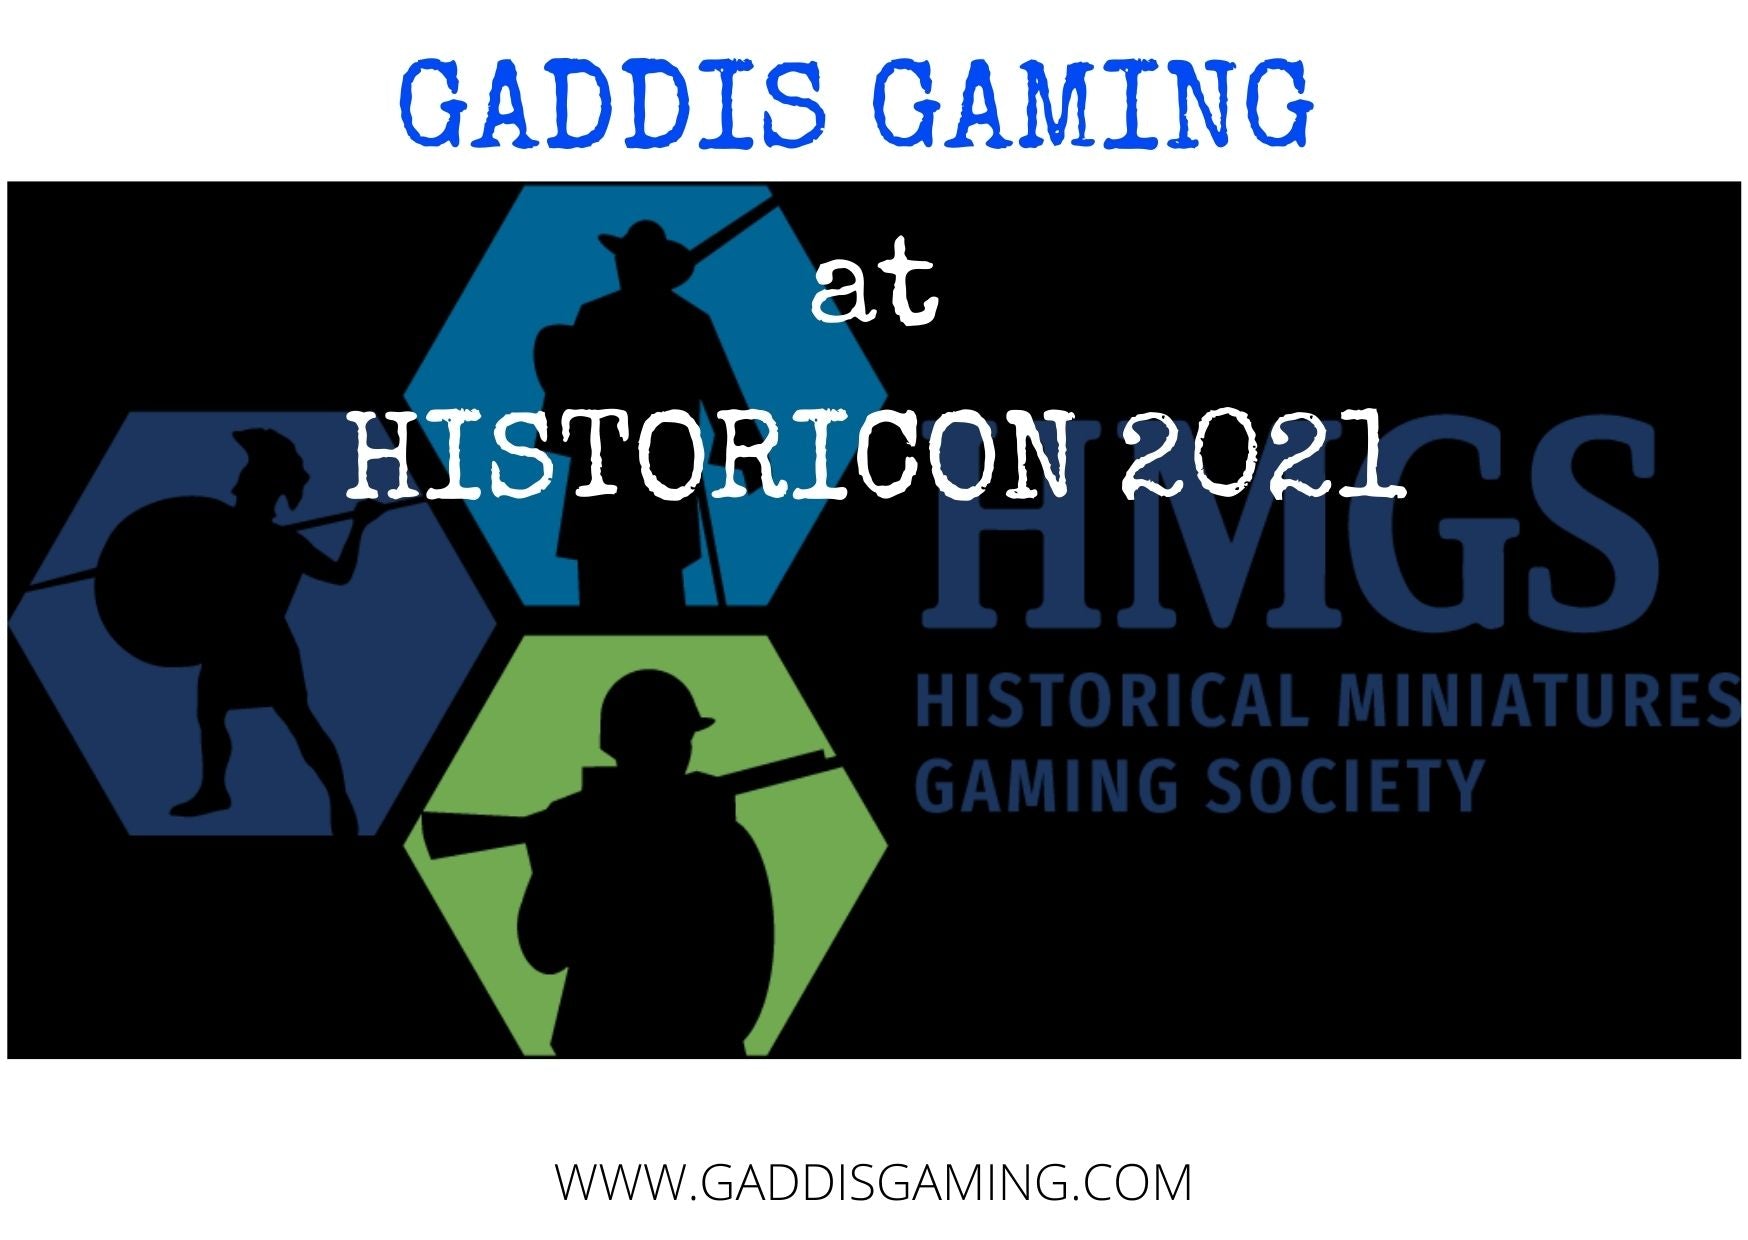 We will be at HISTORICON 2021